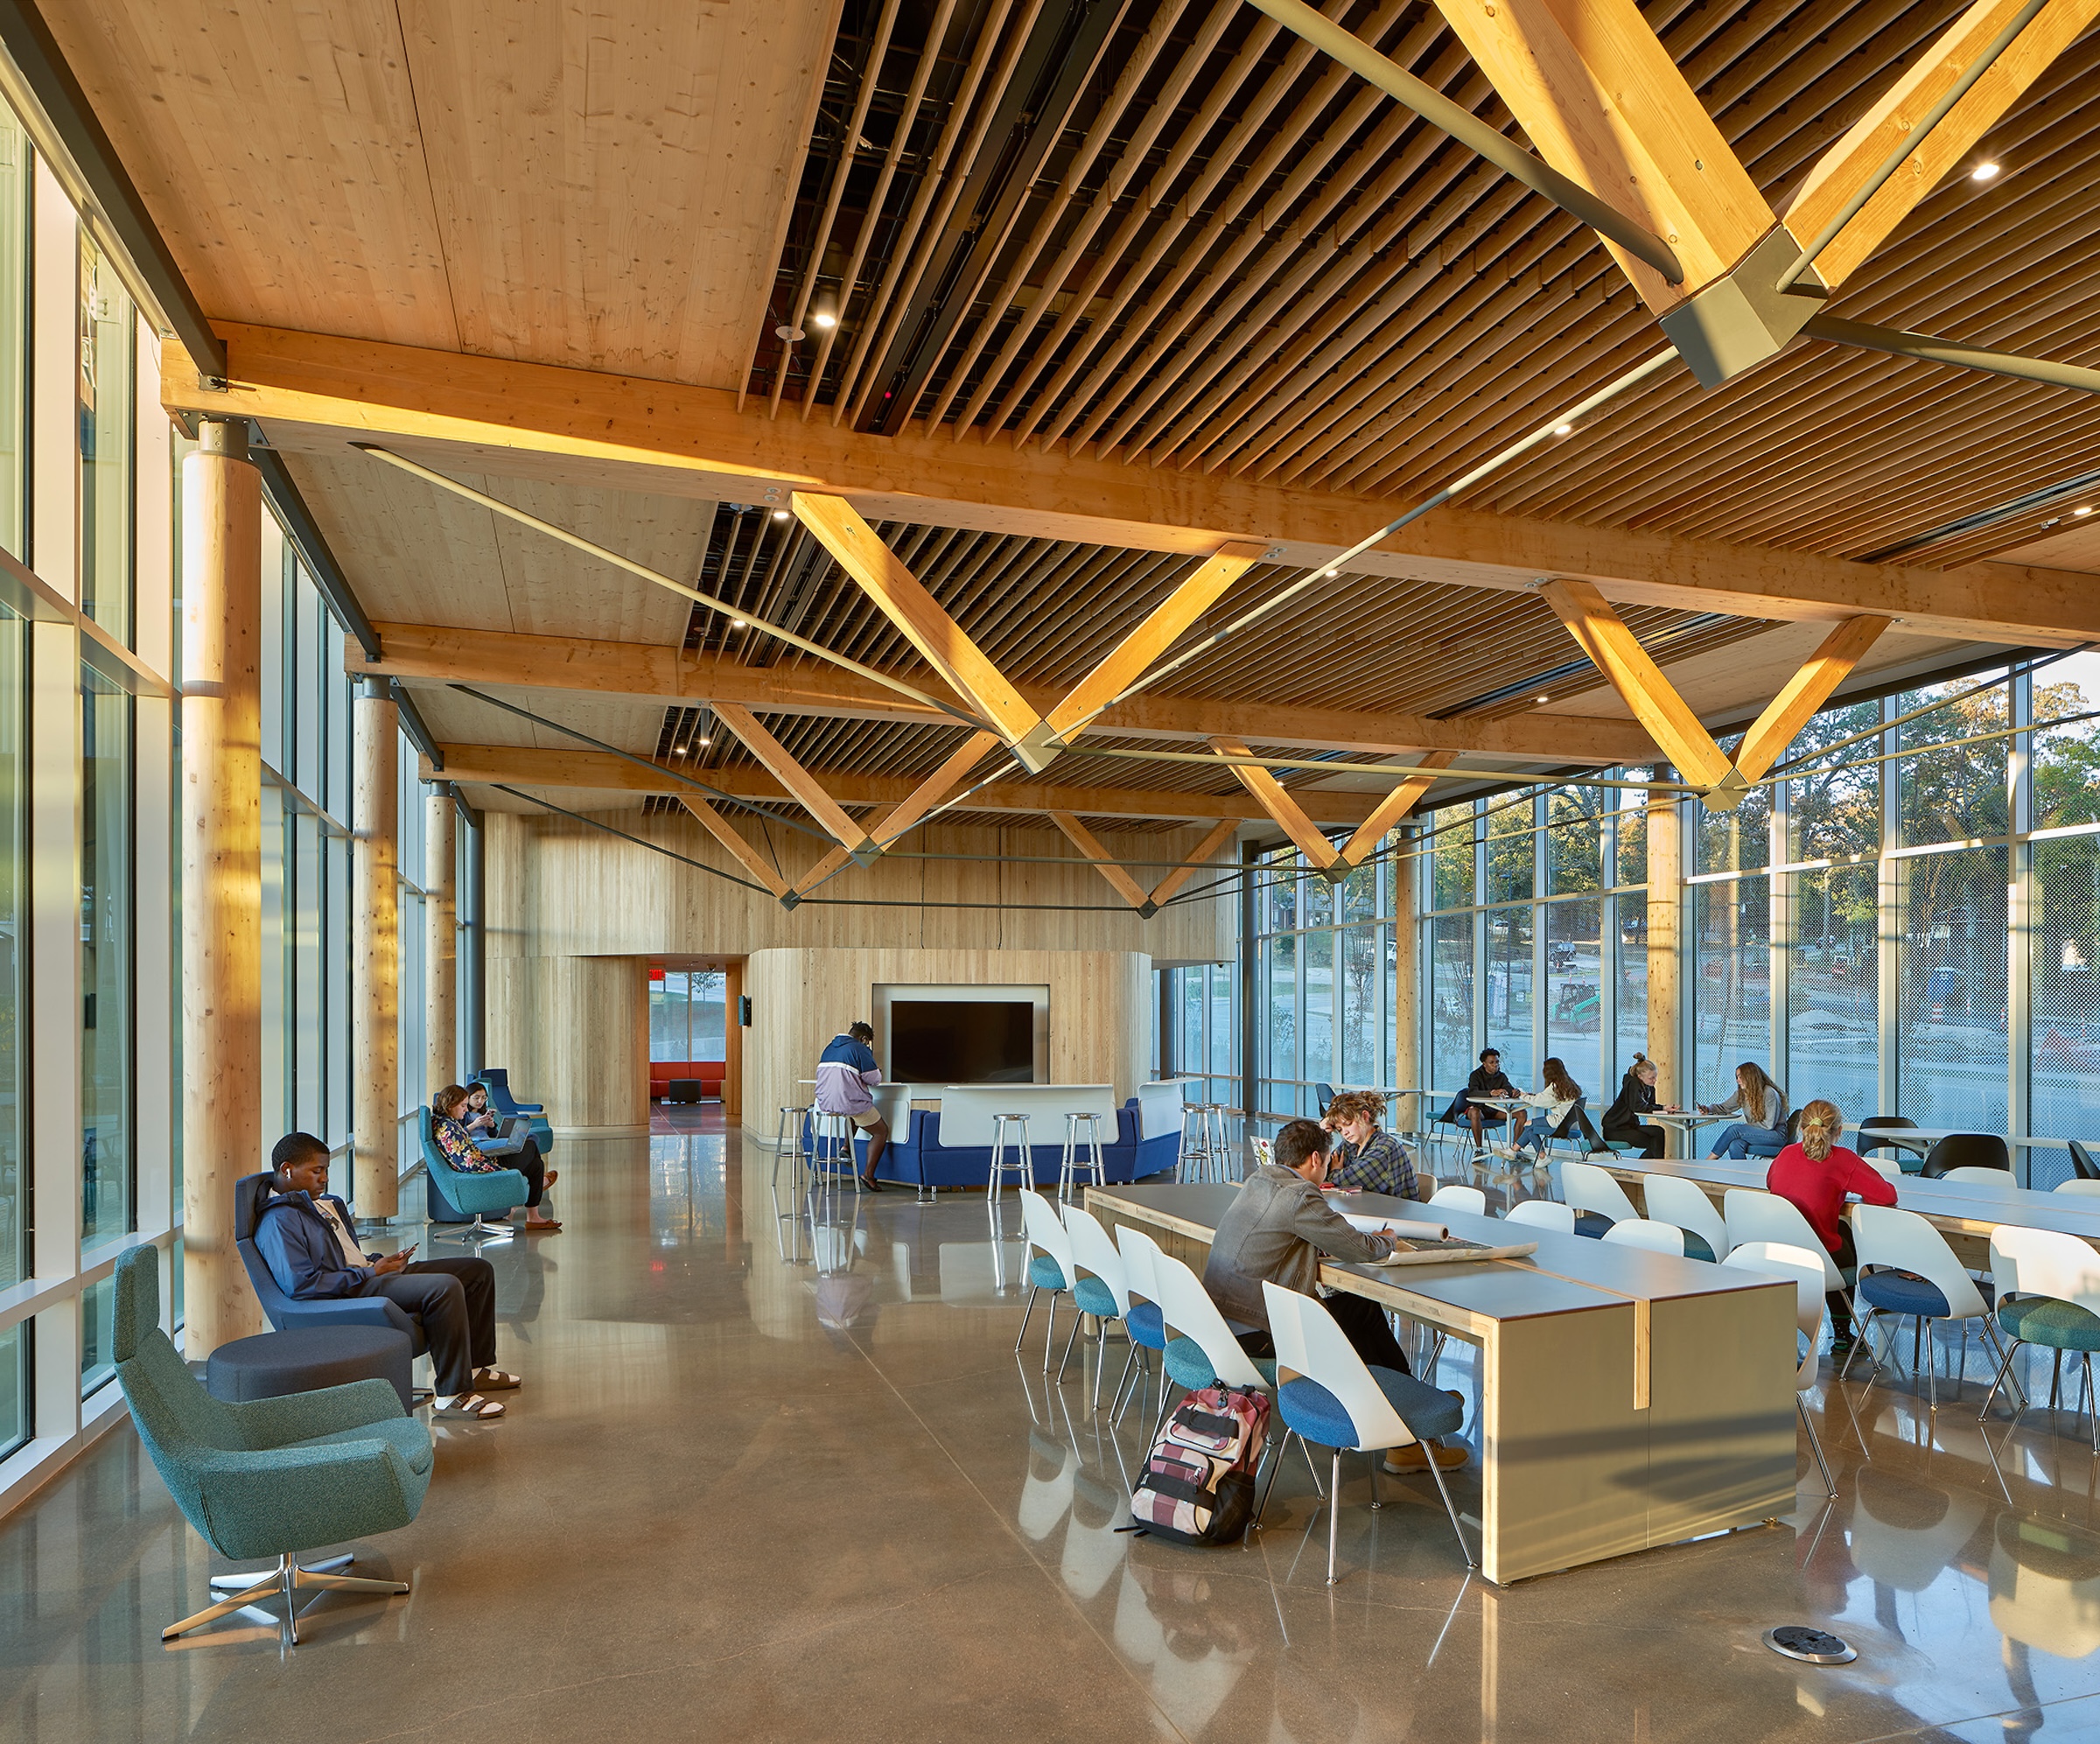 As a building material, mass timber has come a long way since the completion of the John W. Olver Design Building at the University of Massachusetts Amherst in 2017—our firm’s first mass timber building. All photos courtesy Leers Weinzapfel Associates